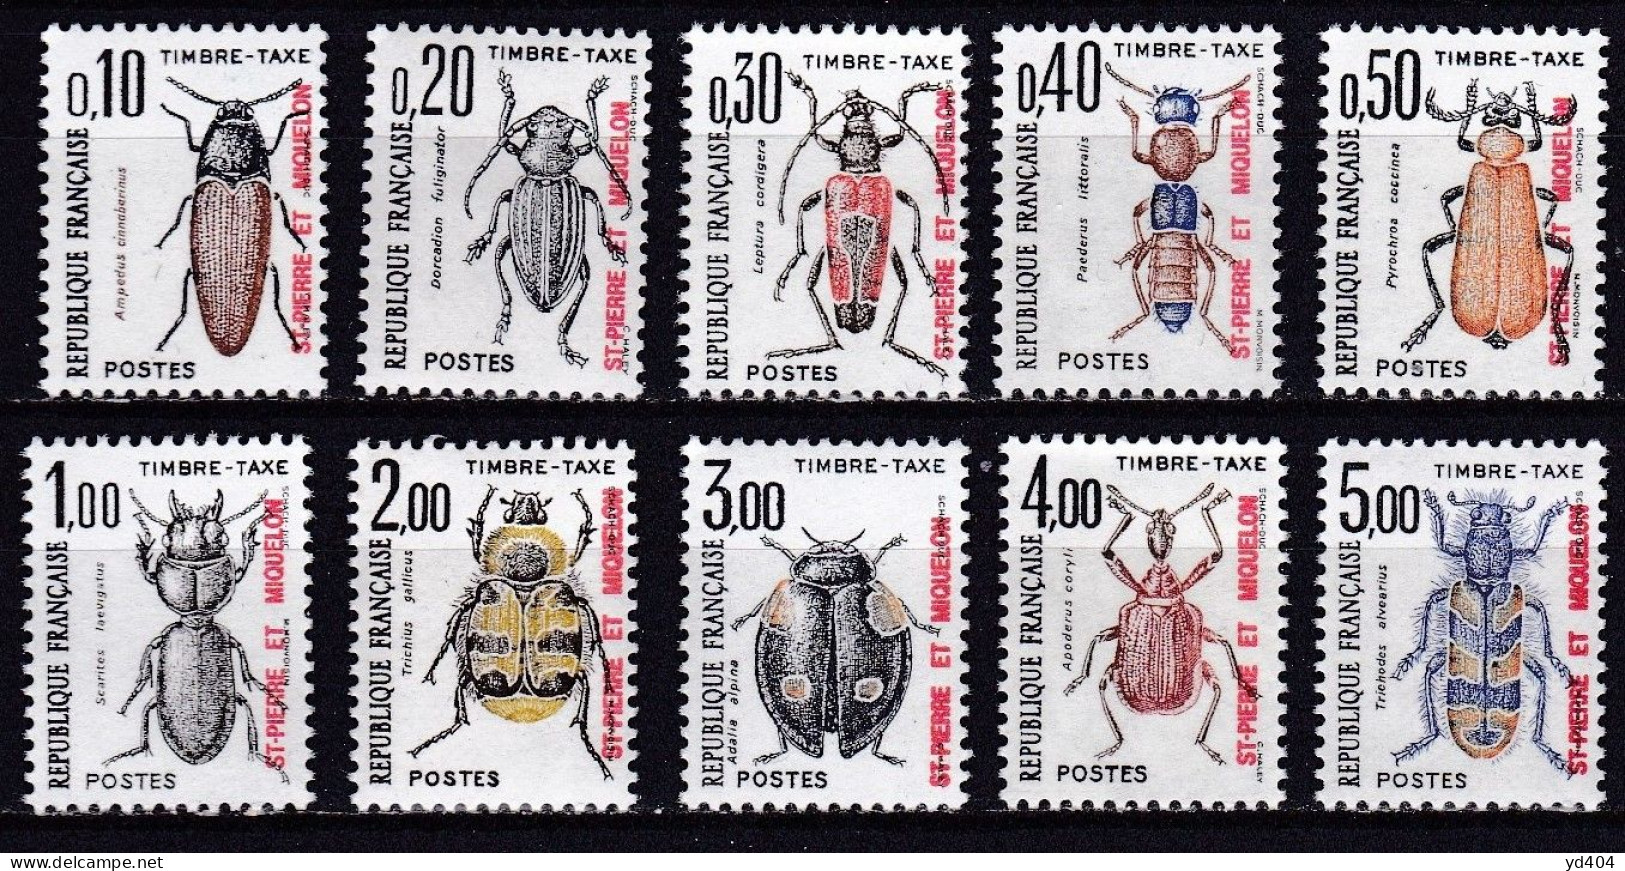 PM-660 – ST PIERRE & MIQUELON – POSTAGE DUE - 1986 – INSECTS – SG # D569/78 MNH 26,50 € - Strafport